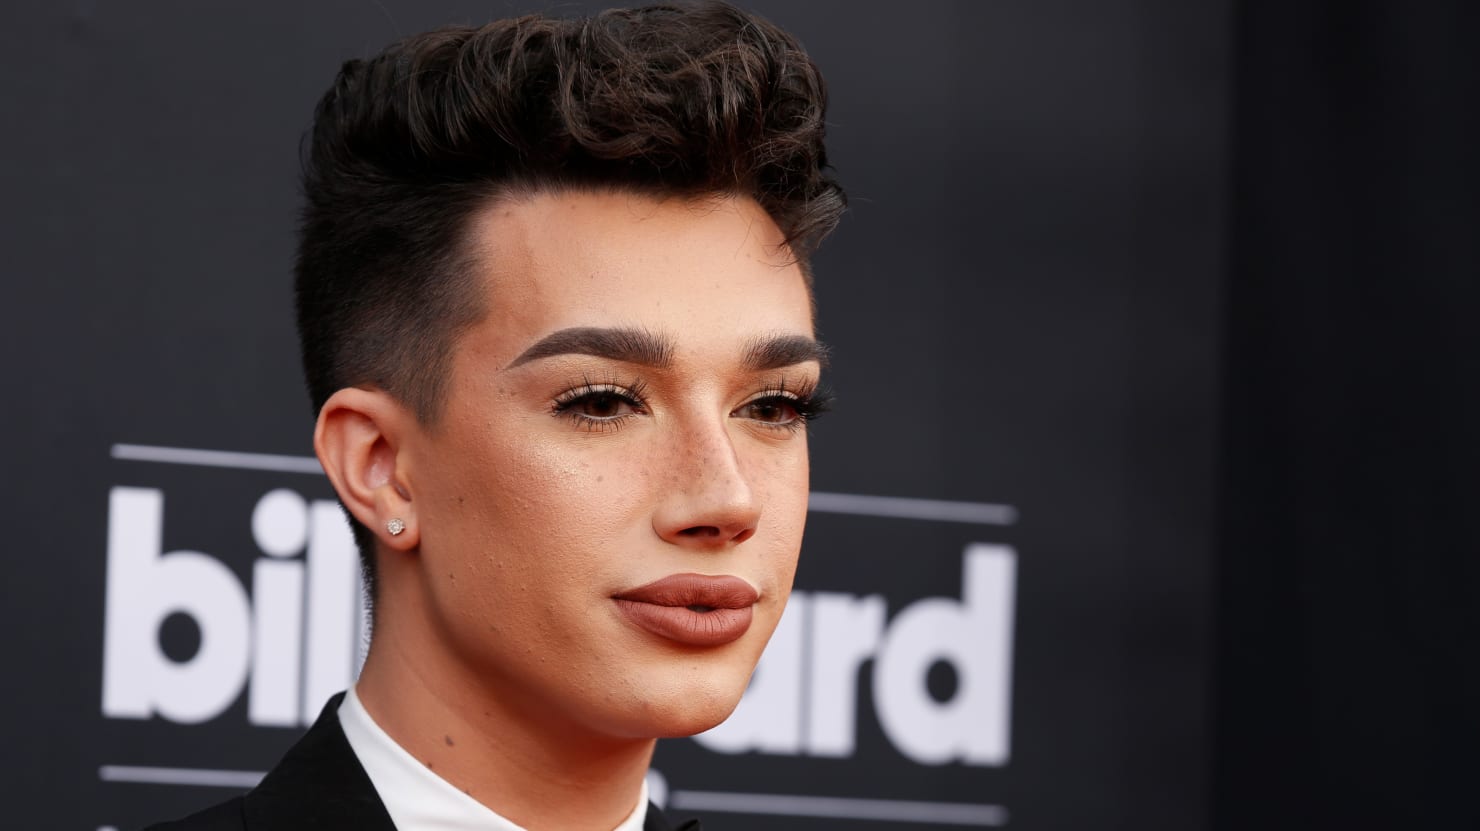 YouTube star James Charles denies taking care of a 16-year-old